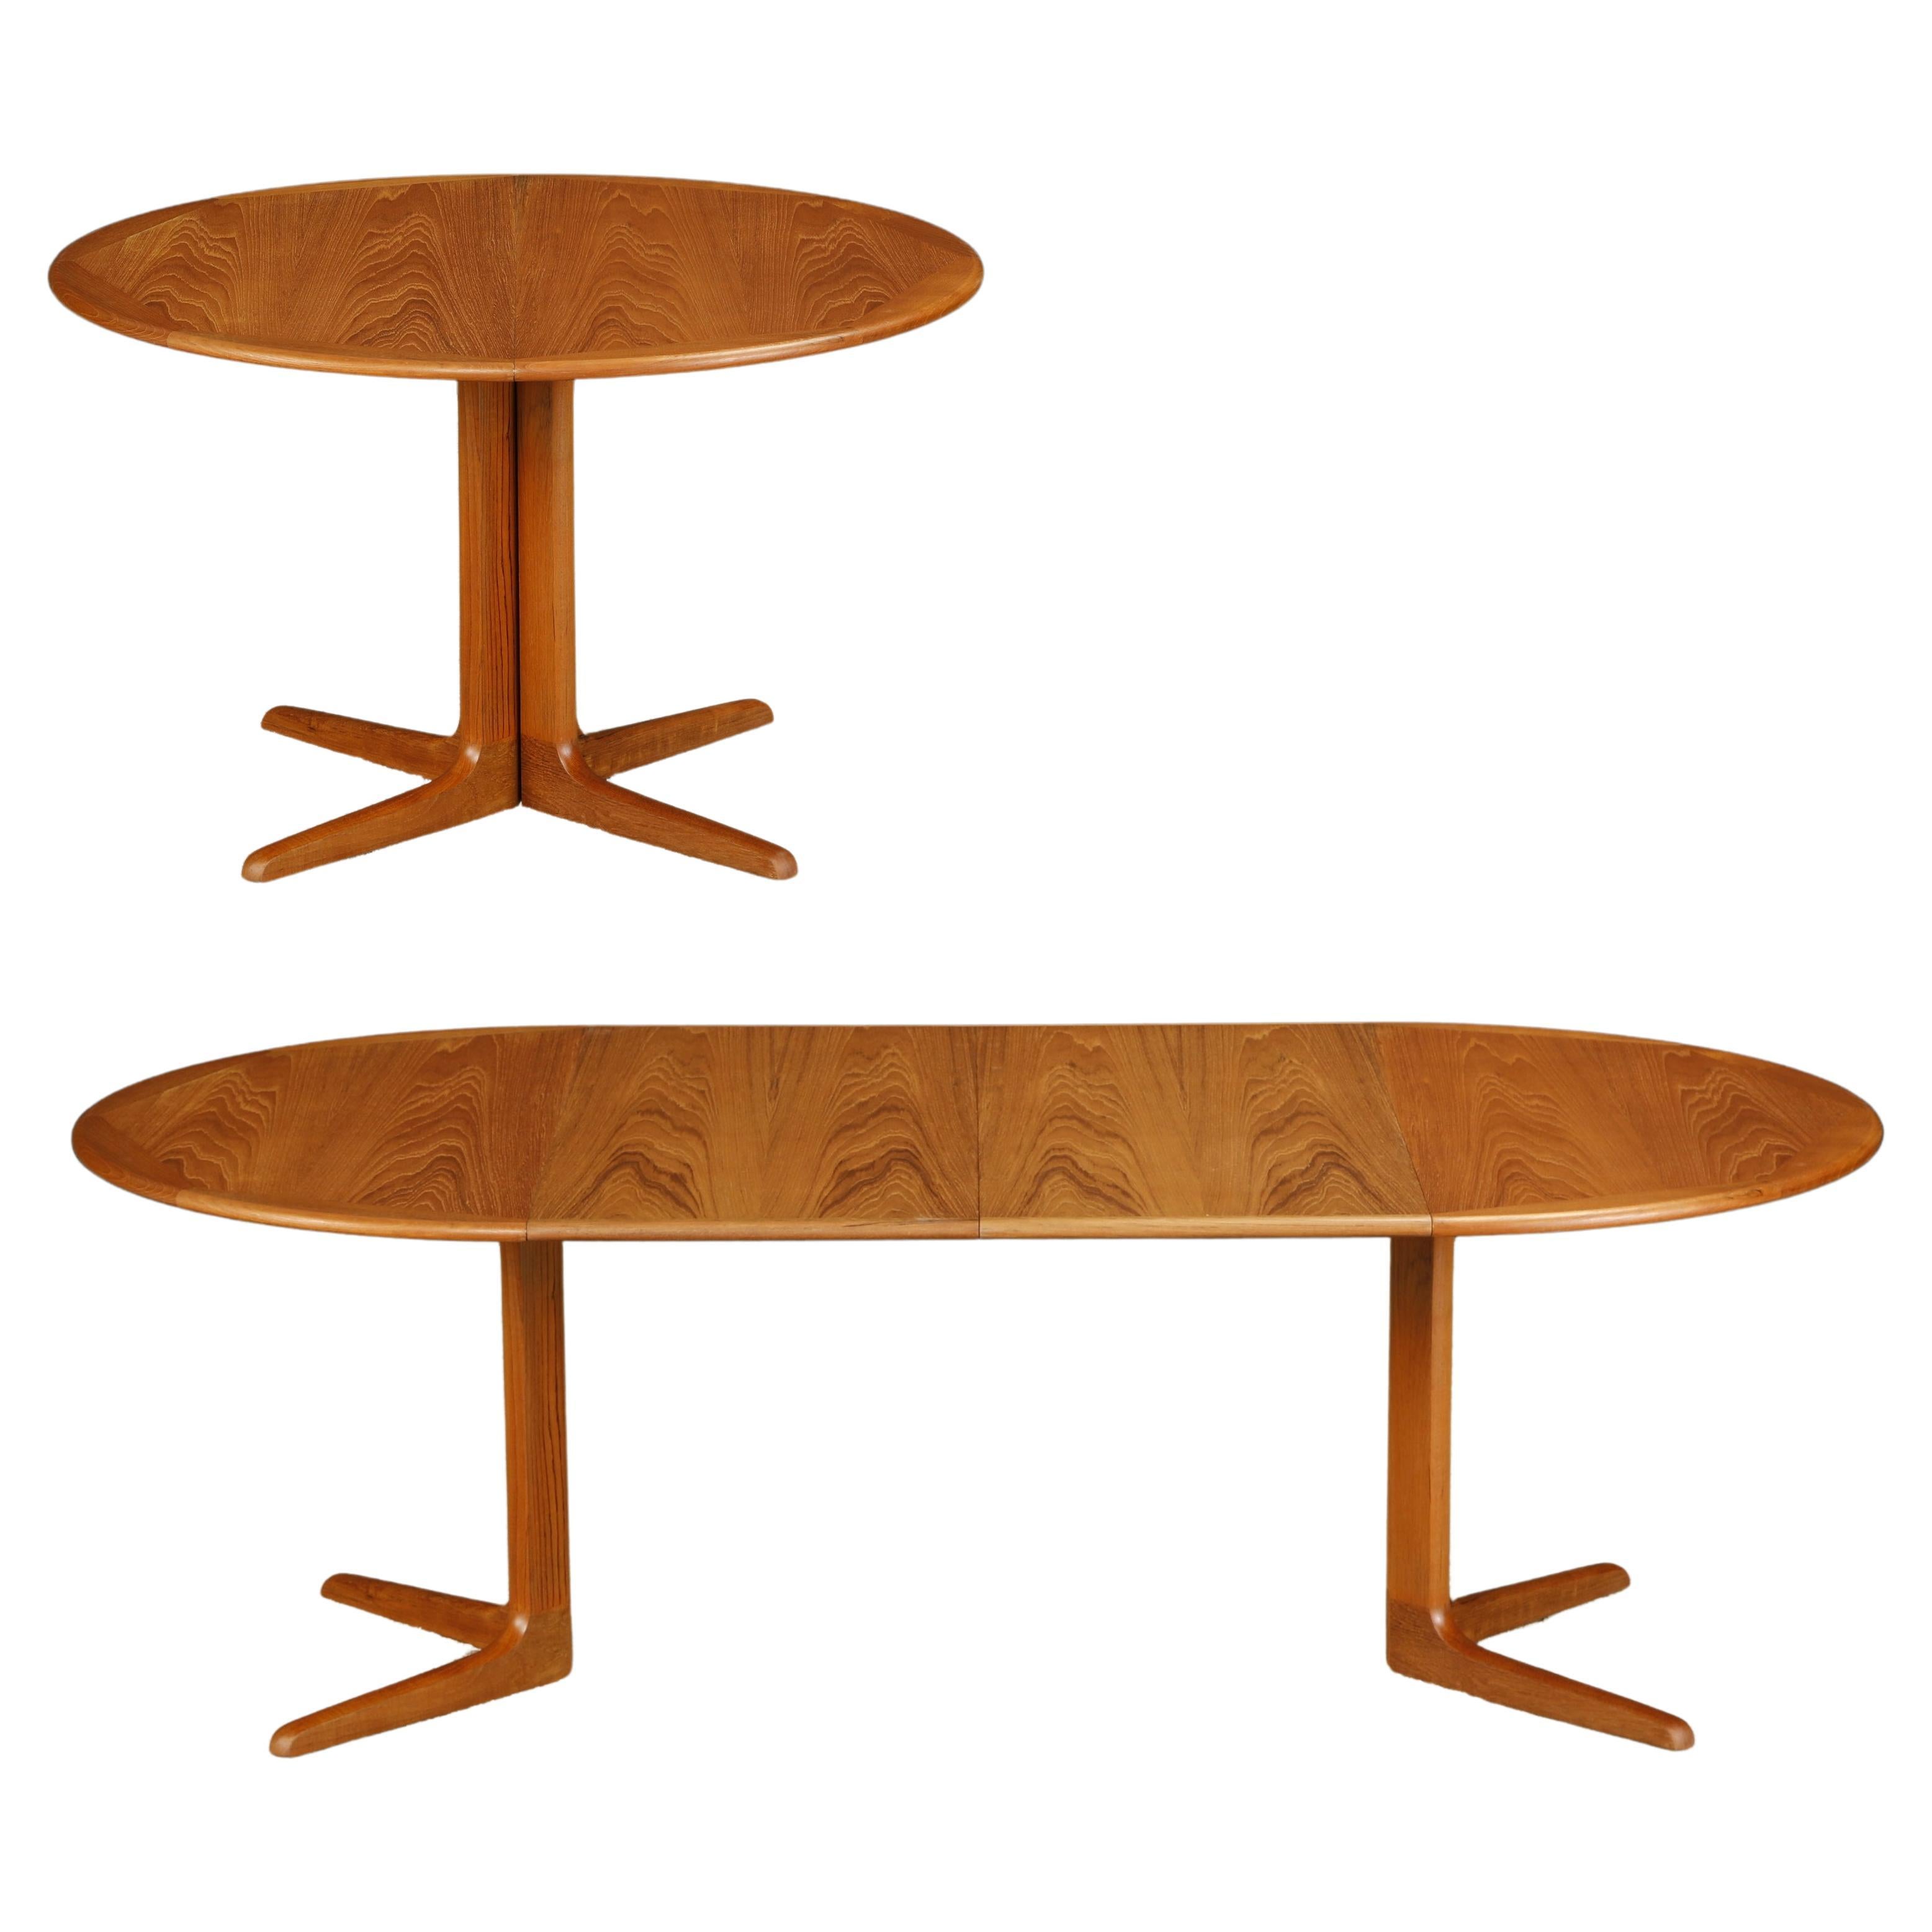 Danish Modern Extendable Dining Table w Two Leaves, c 1970s, Refinished, Signed